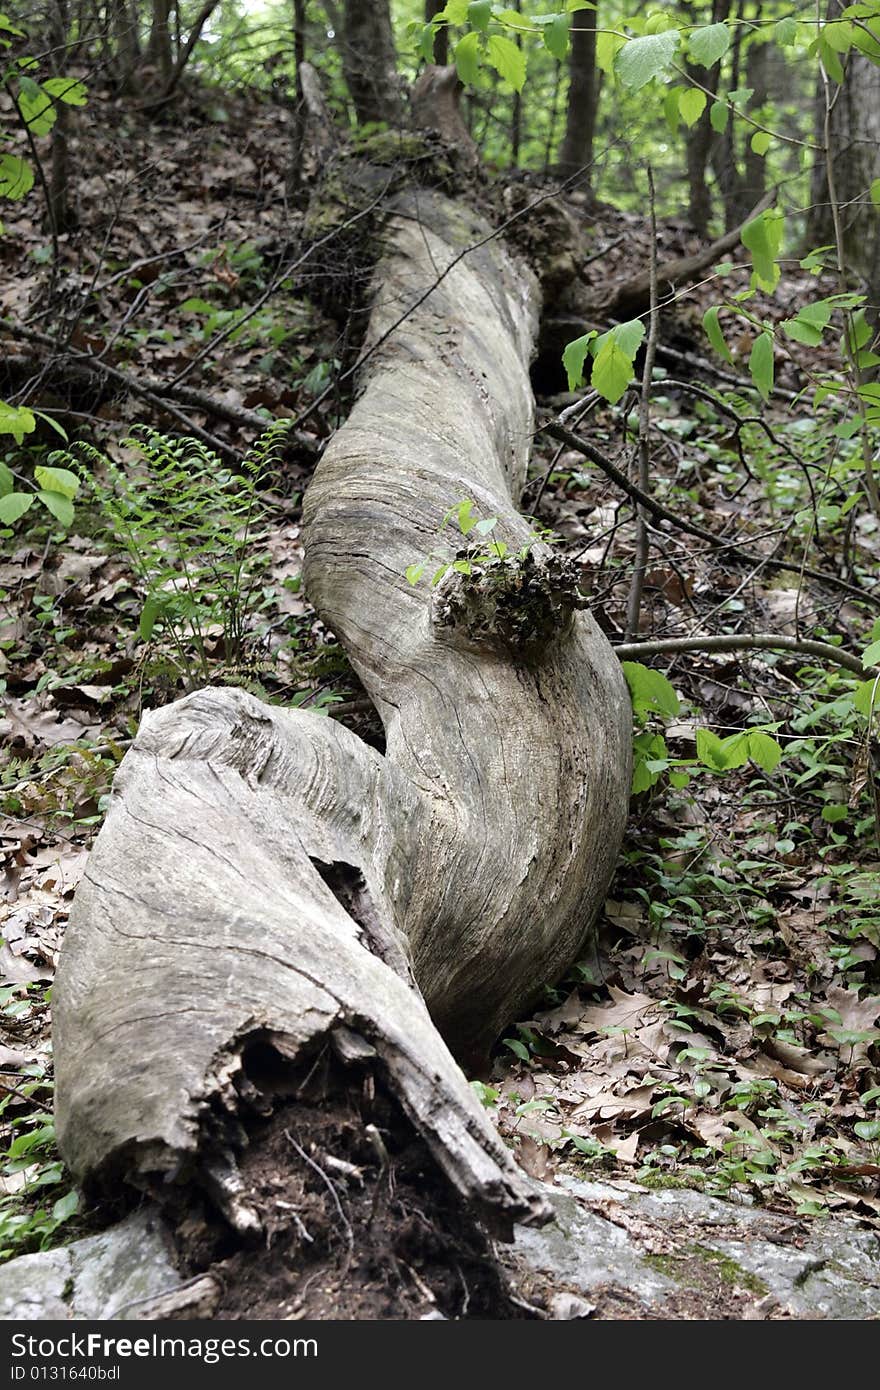 A fallen twisted tree in the woods